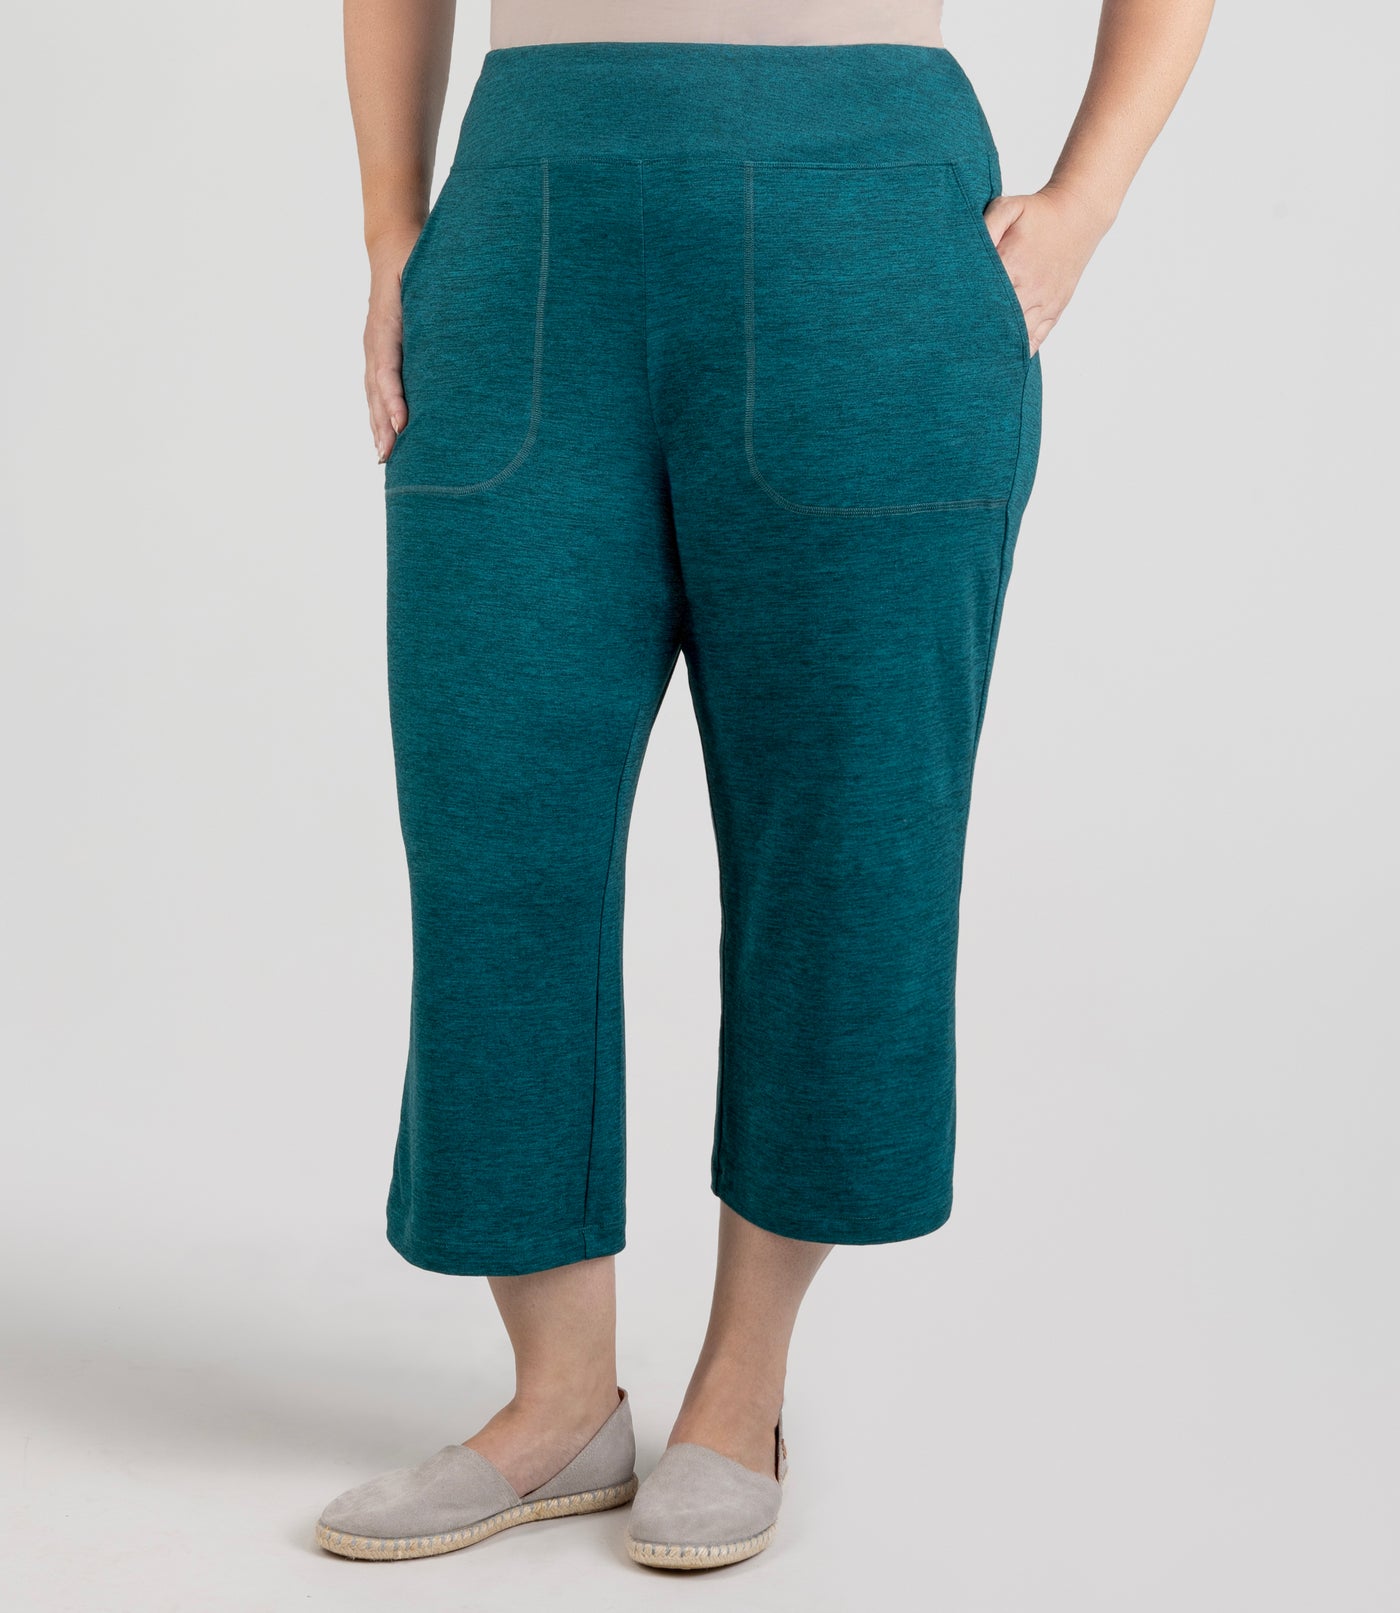 JunoActive model, wearing soft supreme pocketed lounge capri, in color heather dark teal, with both hands in pockets.